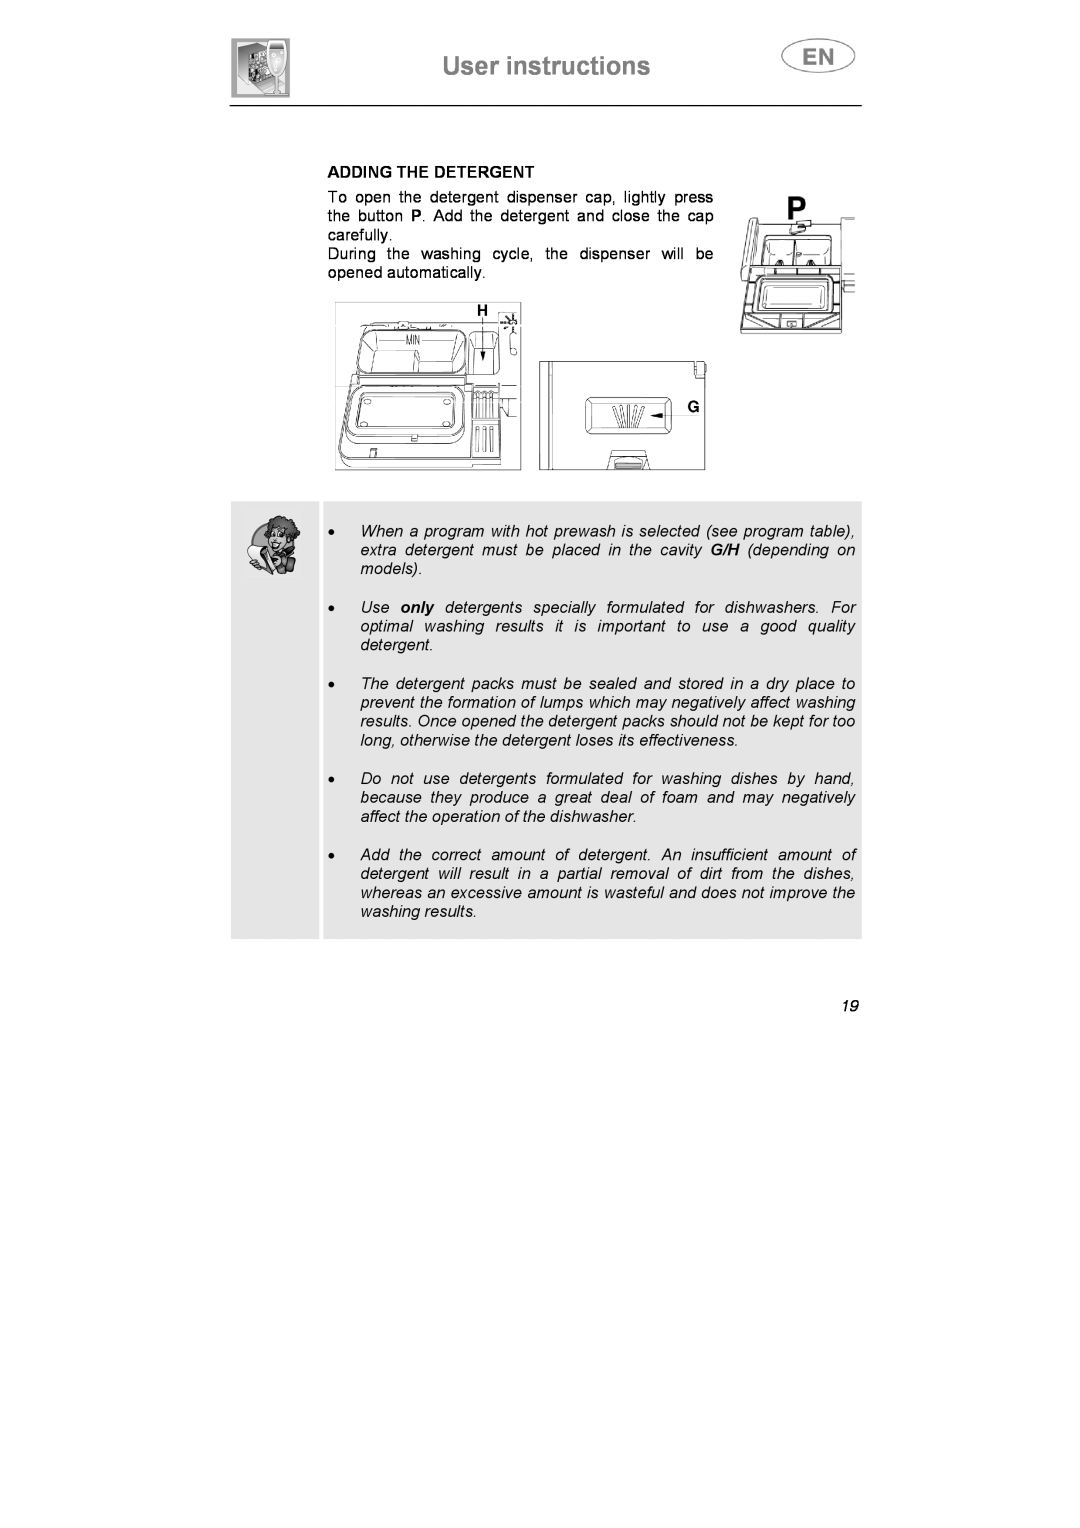 Smeg STA645Q User instructions, Adding The Detergent, During the washing cycle, the dispenser will be opened automatically 